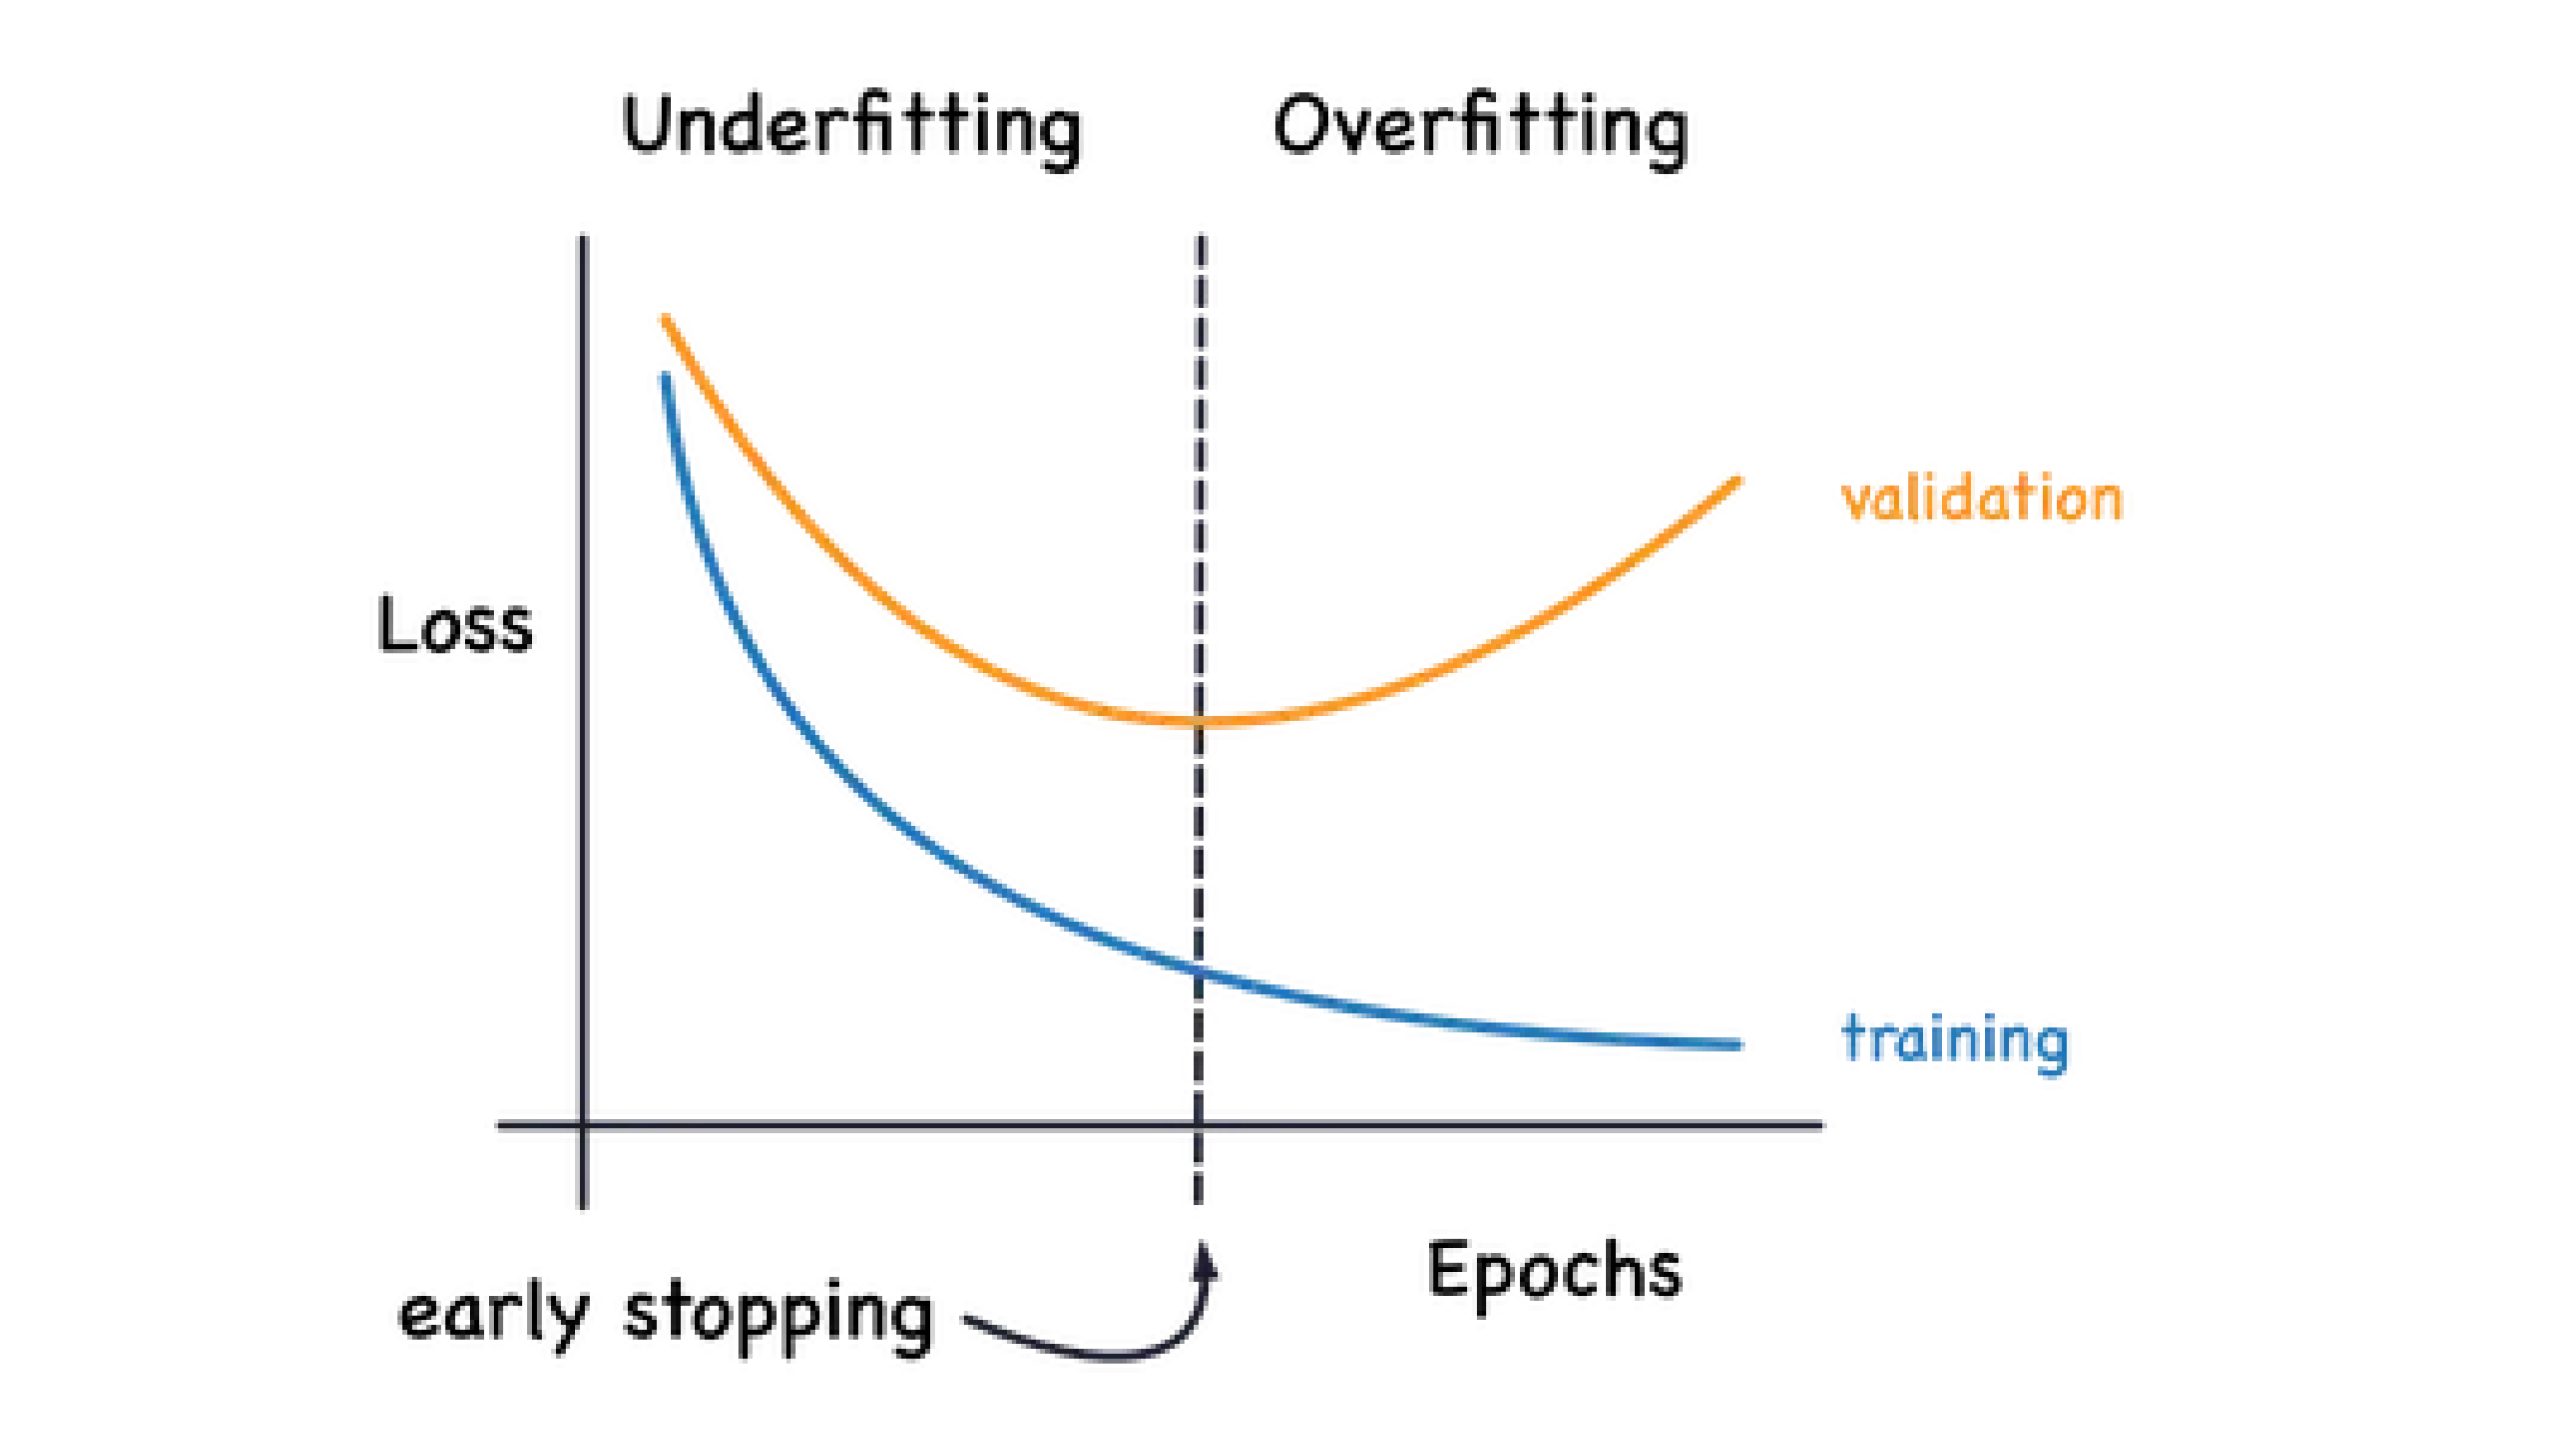 Underfitting and overfitting